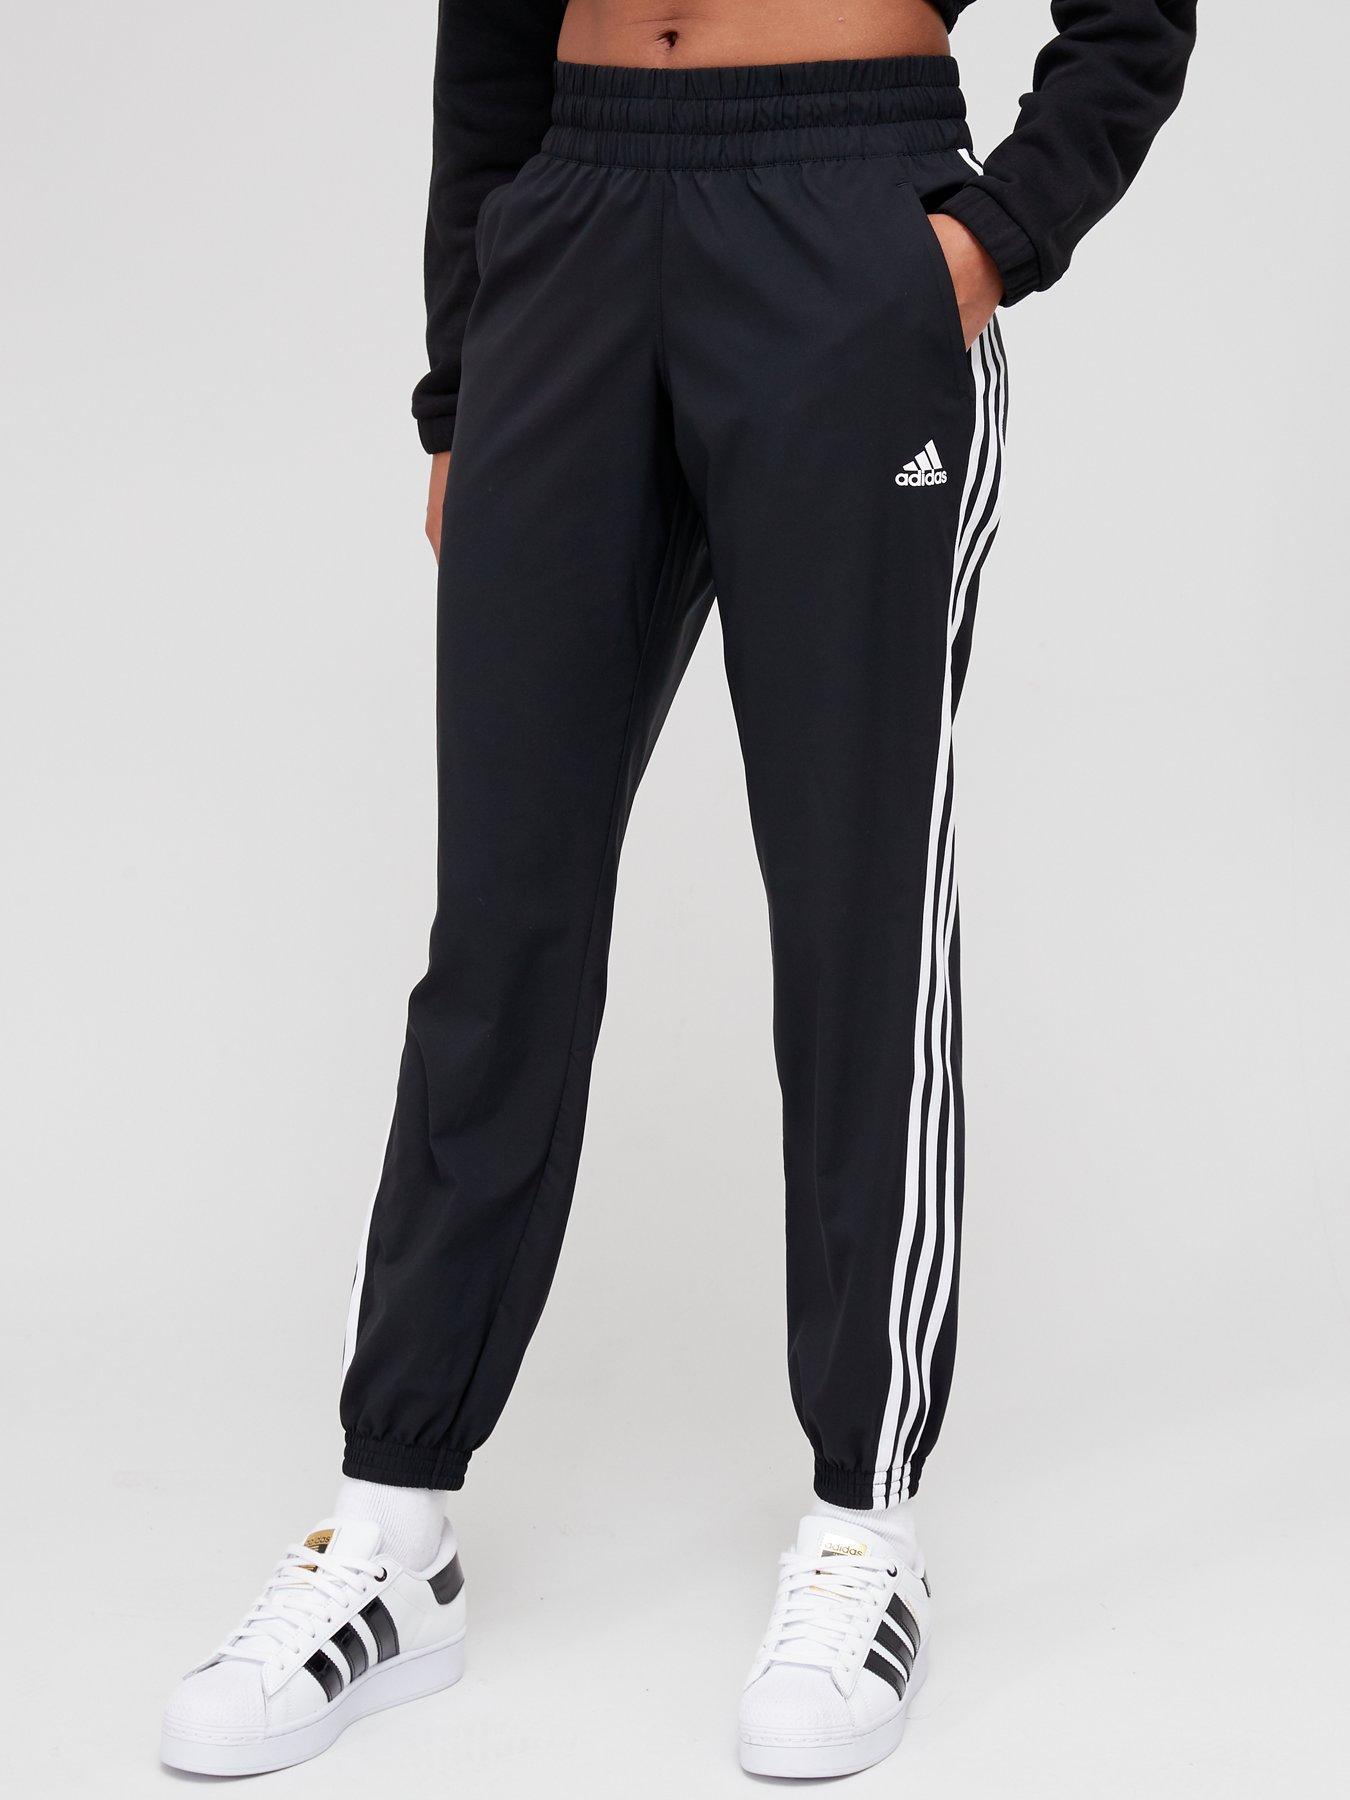 discount 74% WOMEN FASHION Trousers Tracksuit and joggers Straight Black XS Adidas tracksuit and joggers 